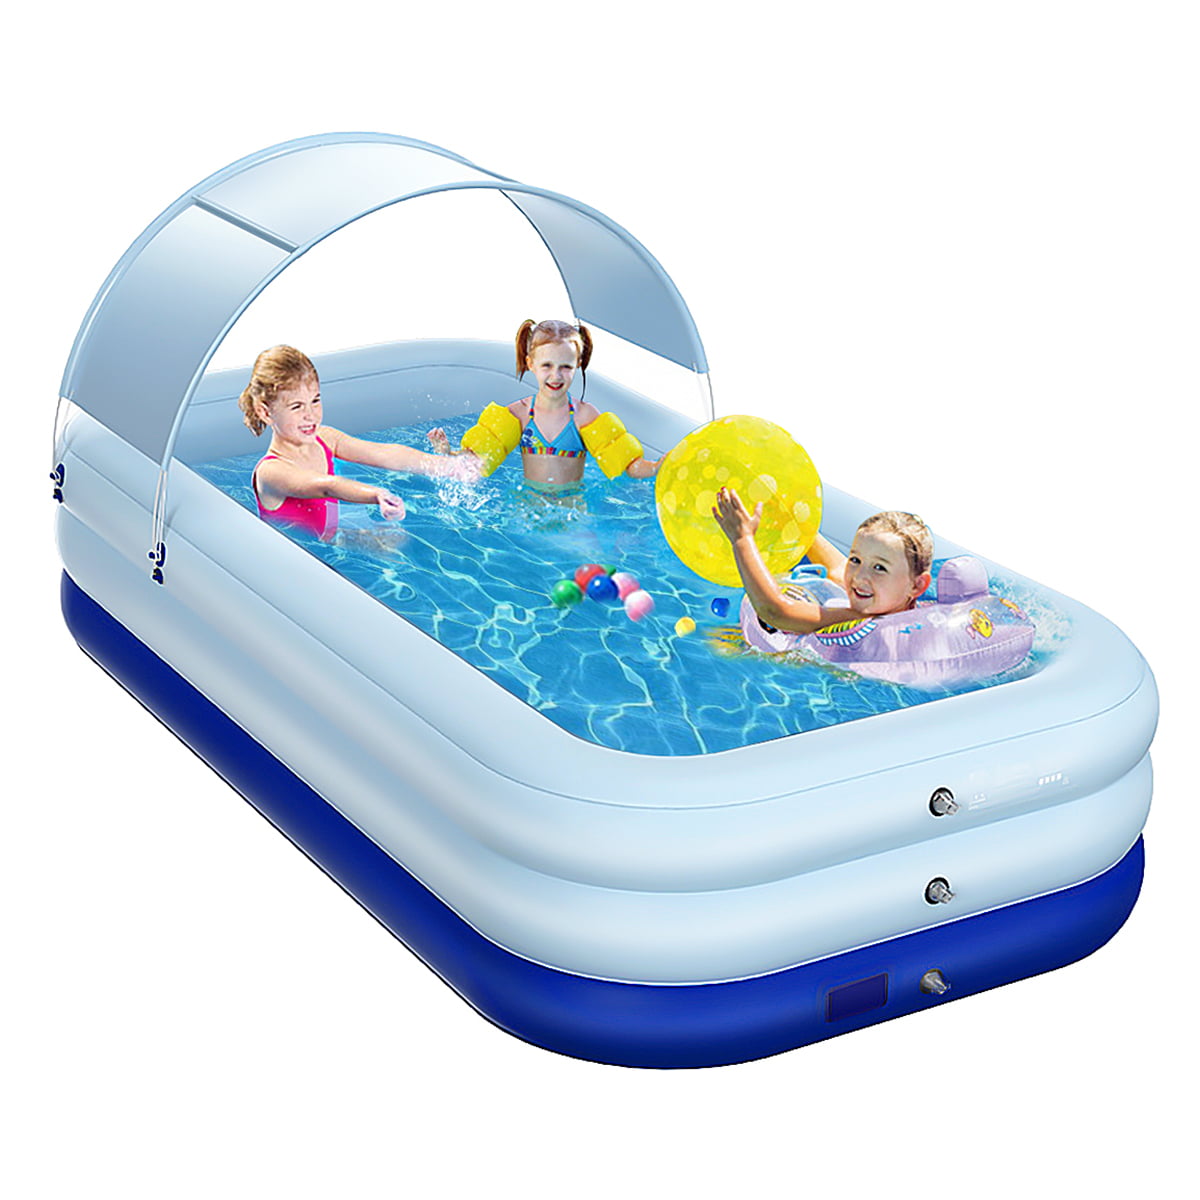 Garden Family Swimming Pool with Colour LED Lights Outdoor Fun Adult Kids 2M 